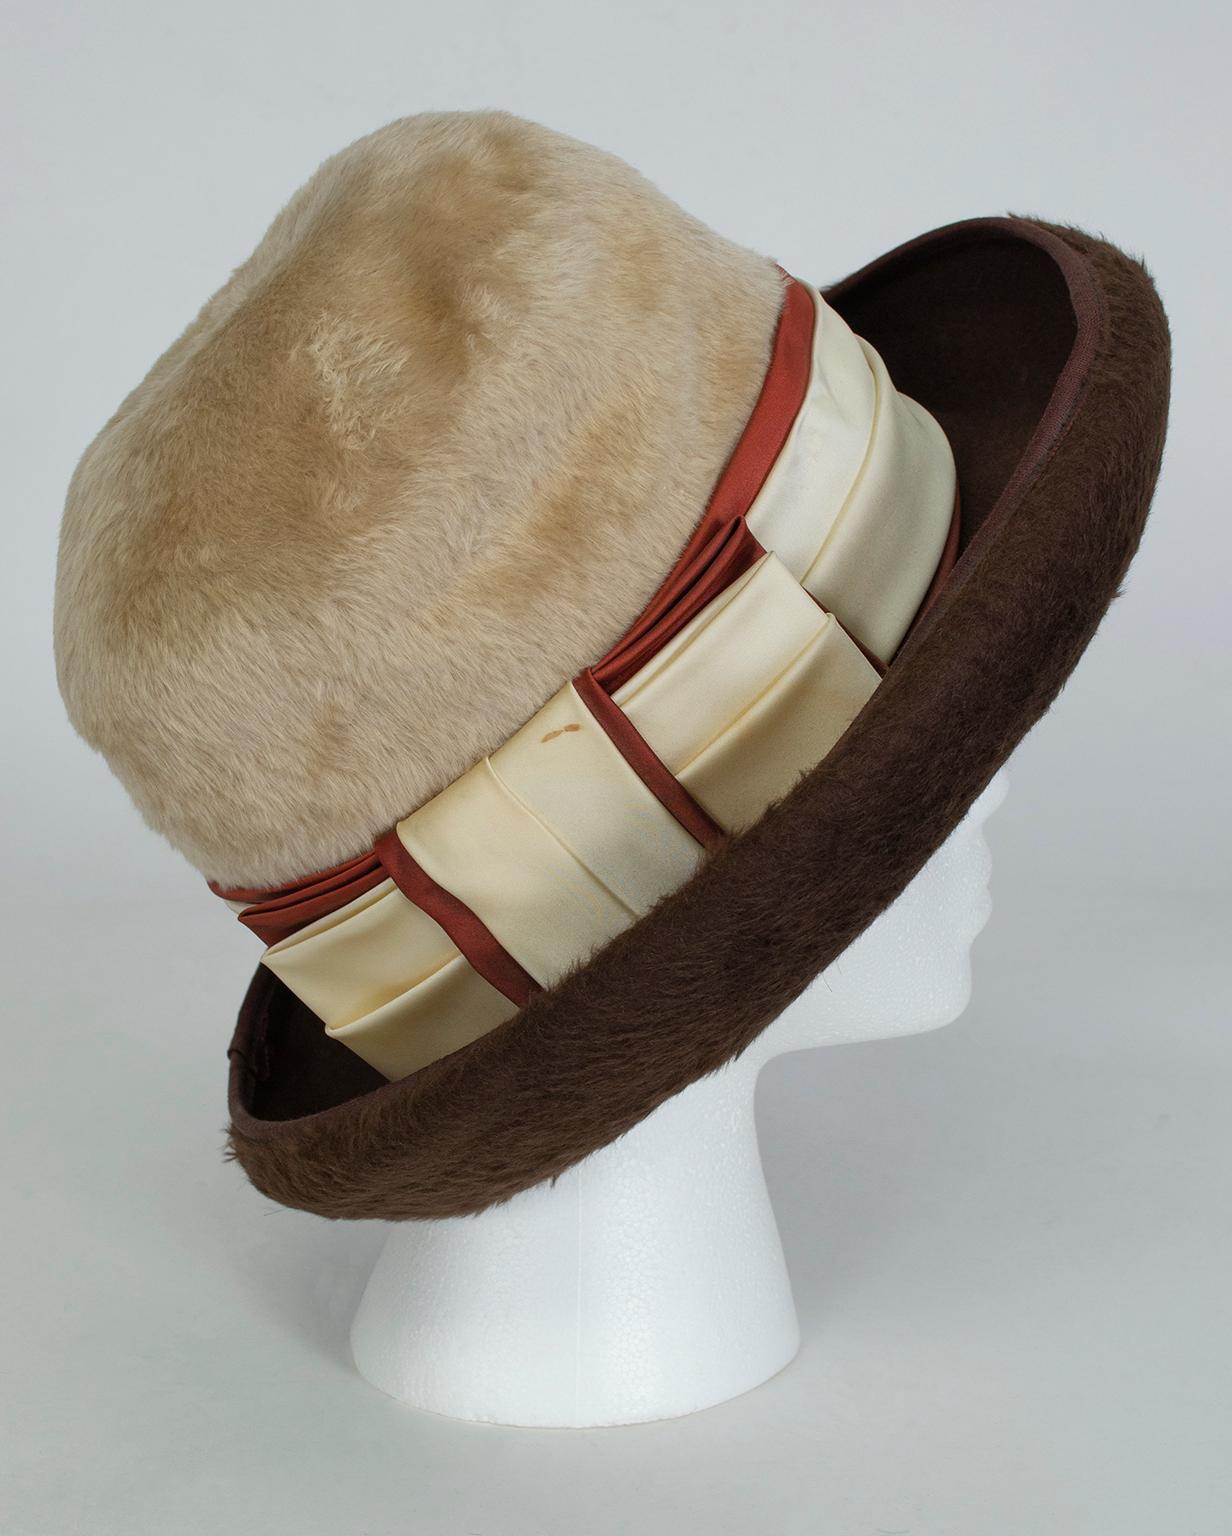 Like Fedoras, bowler hats look particularly good on women because of their typically masculine association. This one takes androgyny a step further by combining an oversized crown, graphic color blocking and plush beaver fur. Uncannily similar to a